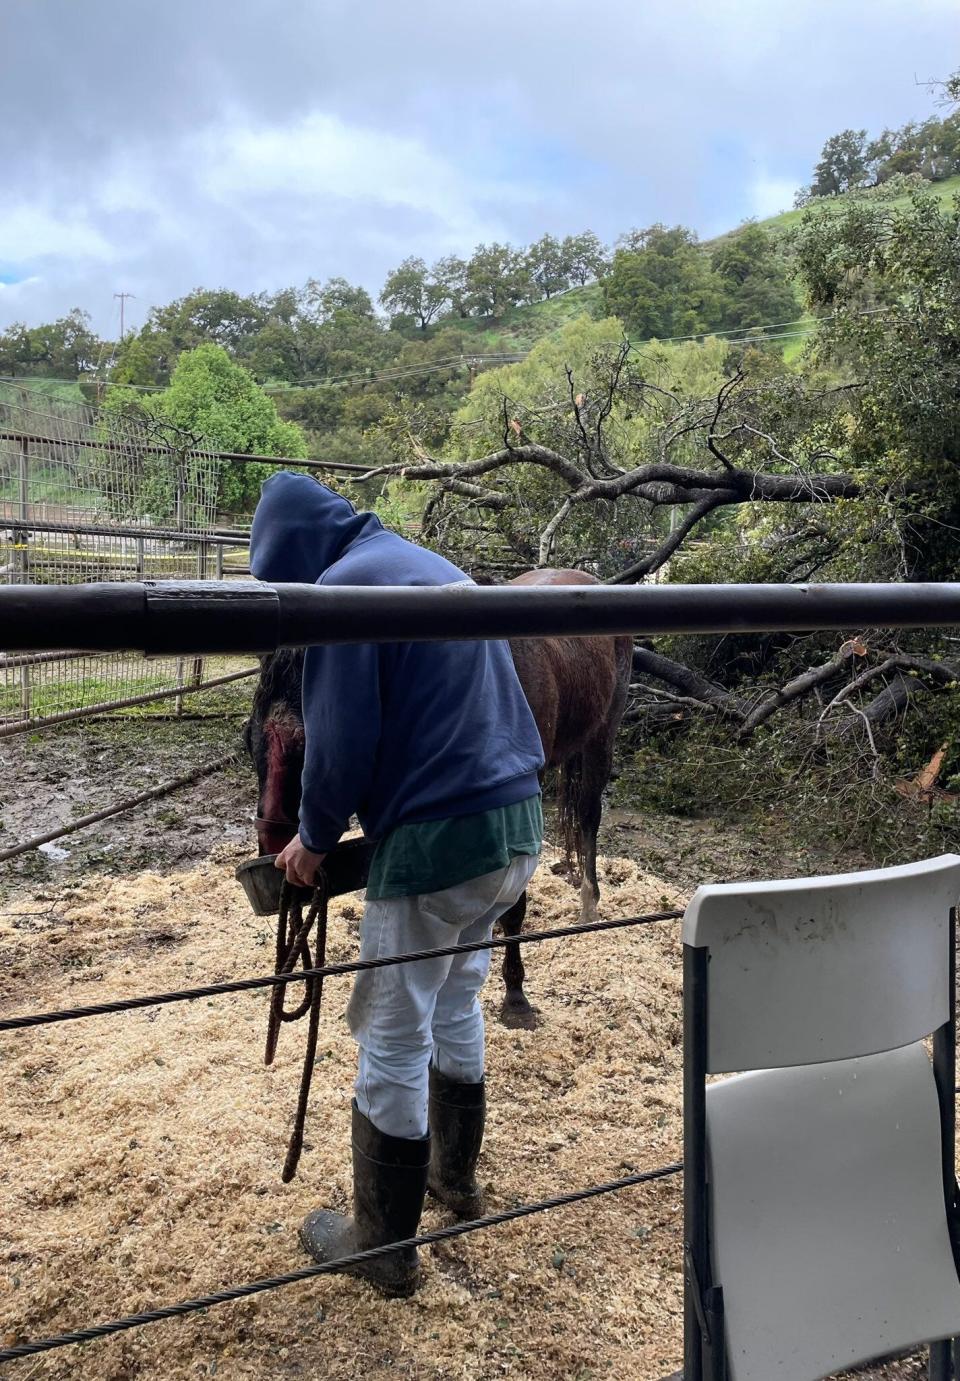 Ventura County firefighters freed two horses in the Oak View area after a tree fell on Wednesday during recent rains. One of the horses was initially thought to have died but survived, officials said.